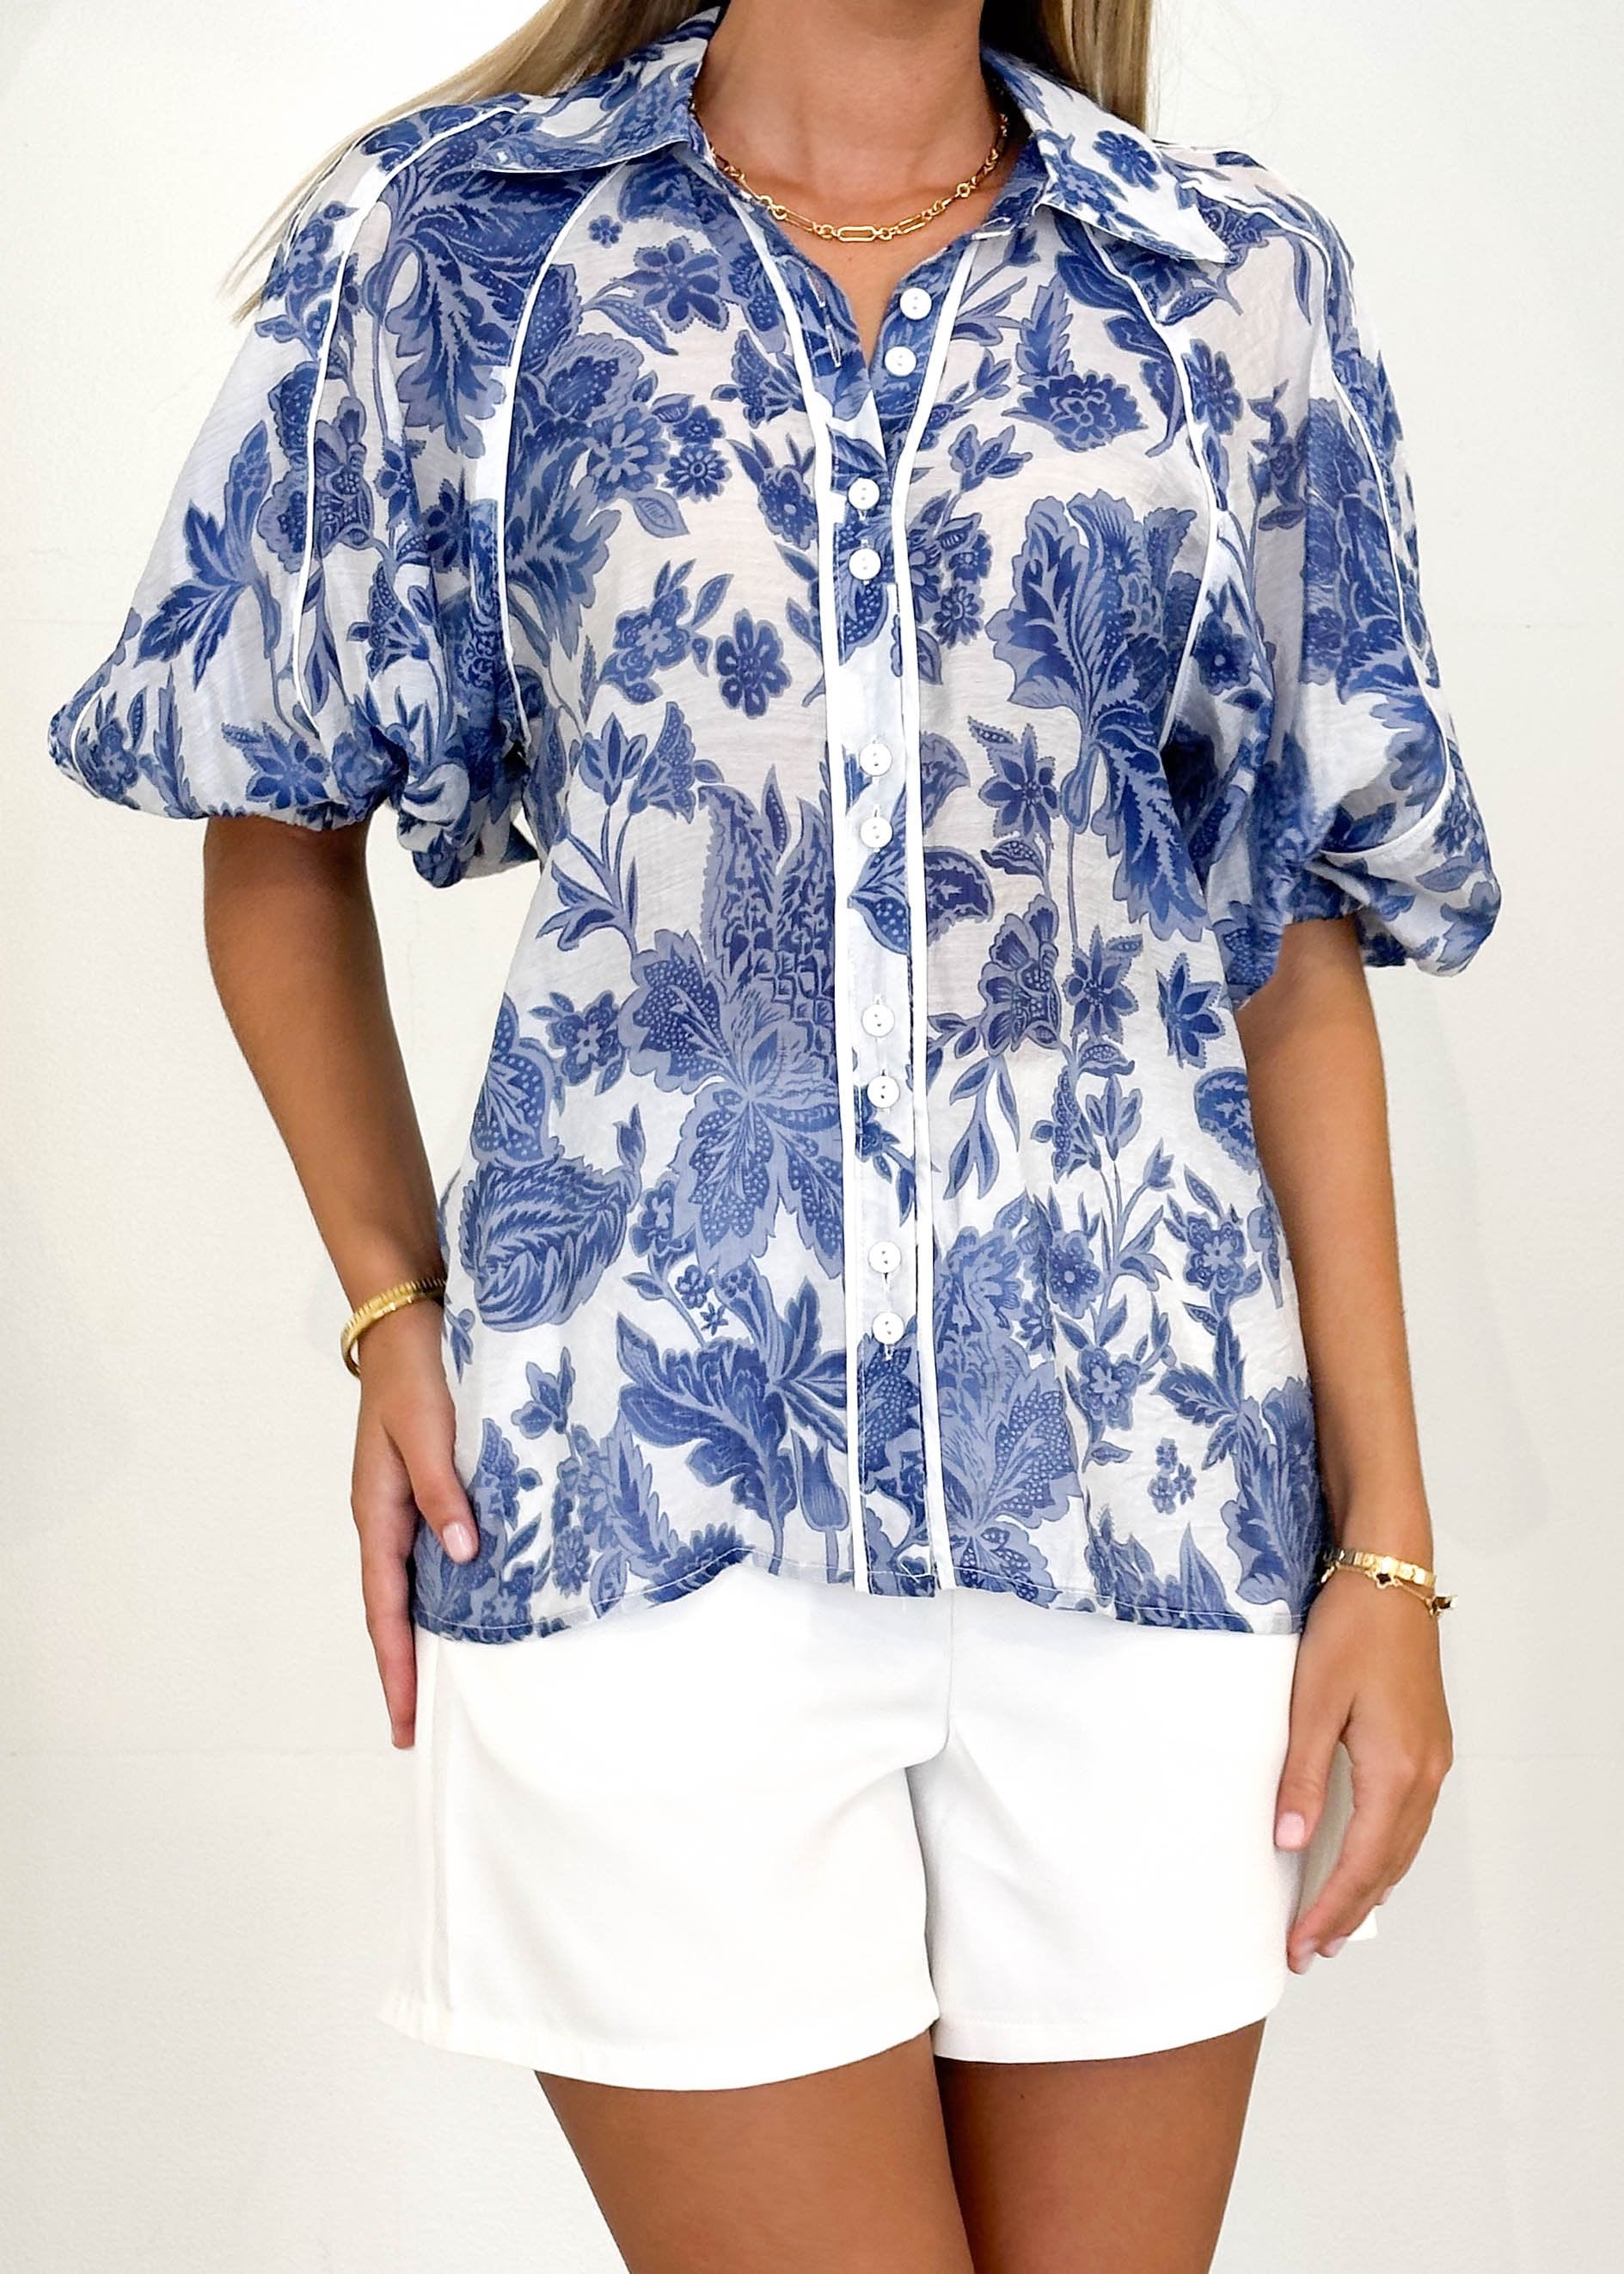 Treely Shirt - Blue Floral